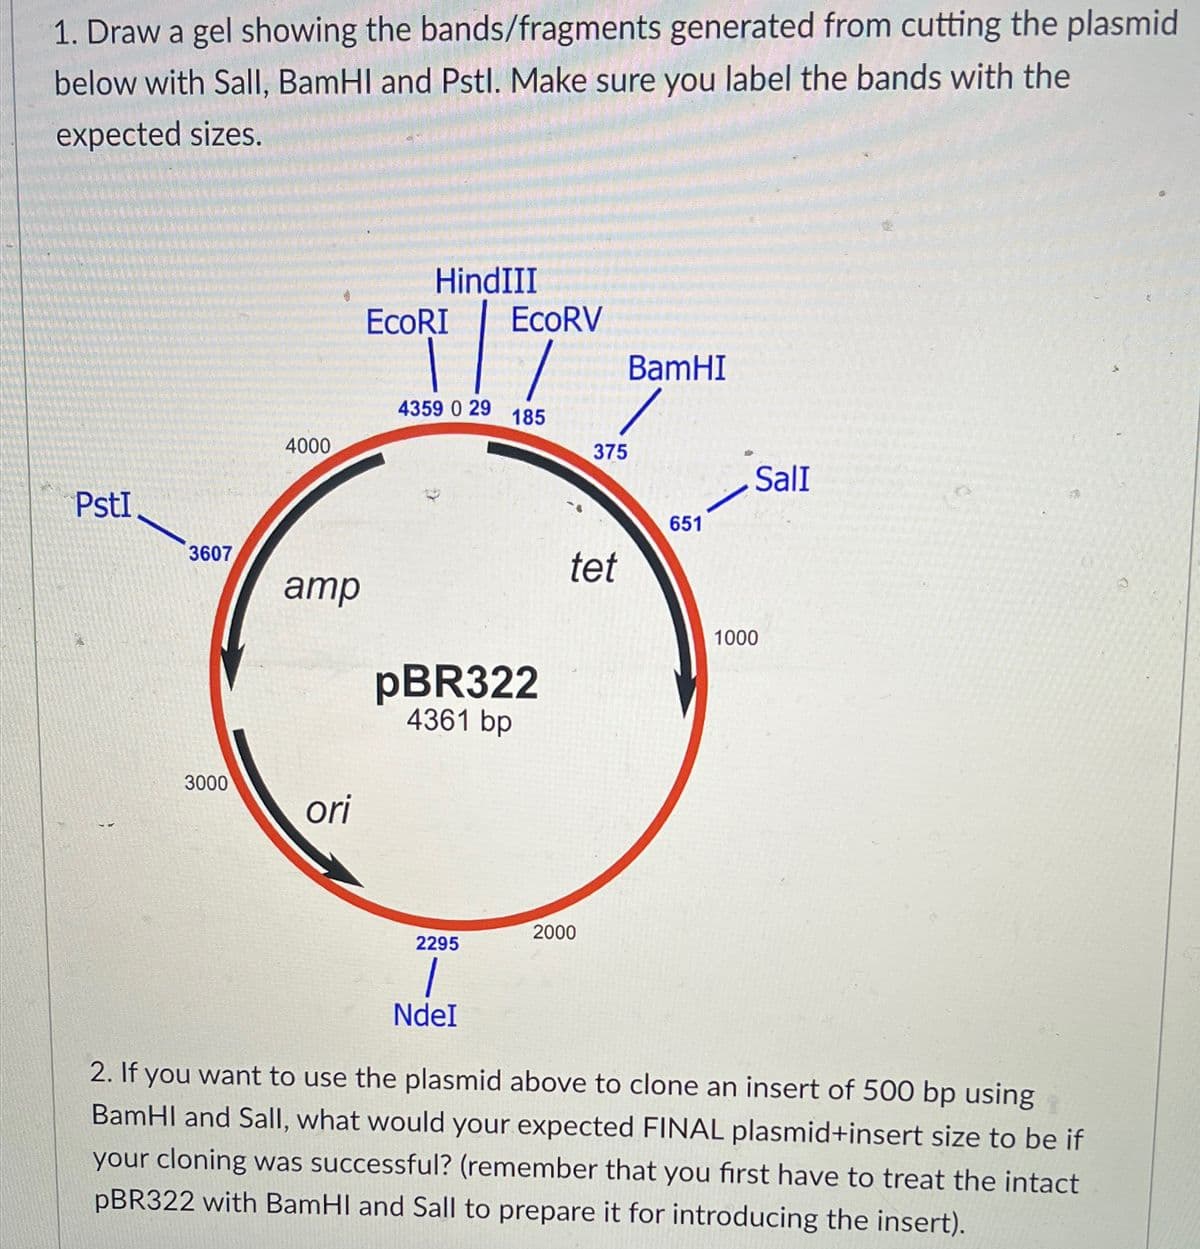 1. Draw a gel showing the bands/fragments
generated from cutting the plasmid
below with Sall, BamHI and Pstl. Make sure you label the bands with the
expected sizes.
PstI
3607
3000
4000
amp
ori
HindIII
EcoRI
4359 0 29
EcoRV
2295
1
NdeI
185
pBR322
4361 bp
375
tet
2000
BamHI
651
Sall
1000
2. If you want to use the plasmid above to clone an insert of 500 bp using
BamHI and Sall, what would your expected FINAL plasmid+insert size to be if
your cloning was successful? (remember that you first have to treat the intact
pBR322 with BamHI and Sall to prepare it for introducing the insert).